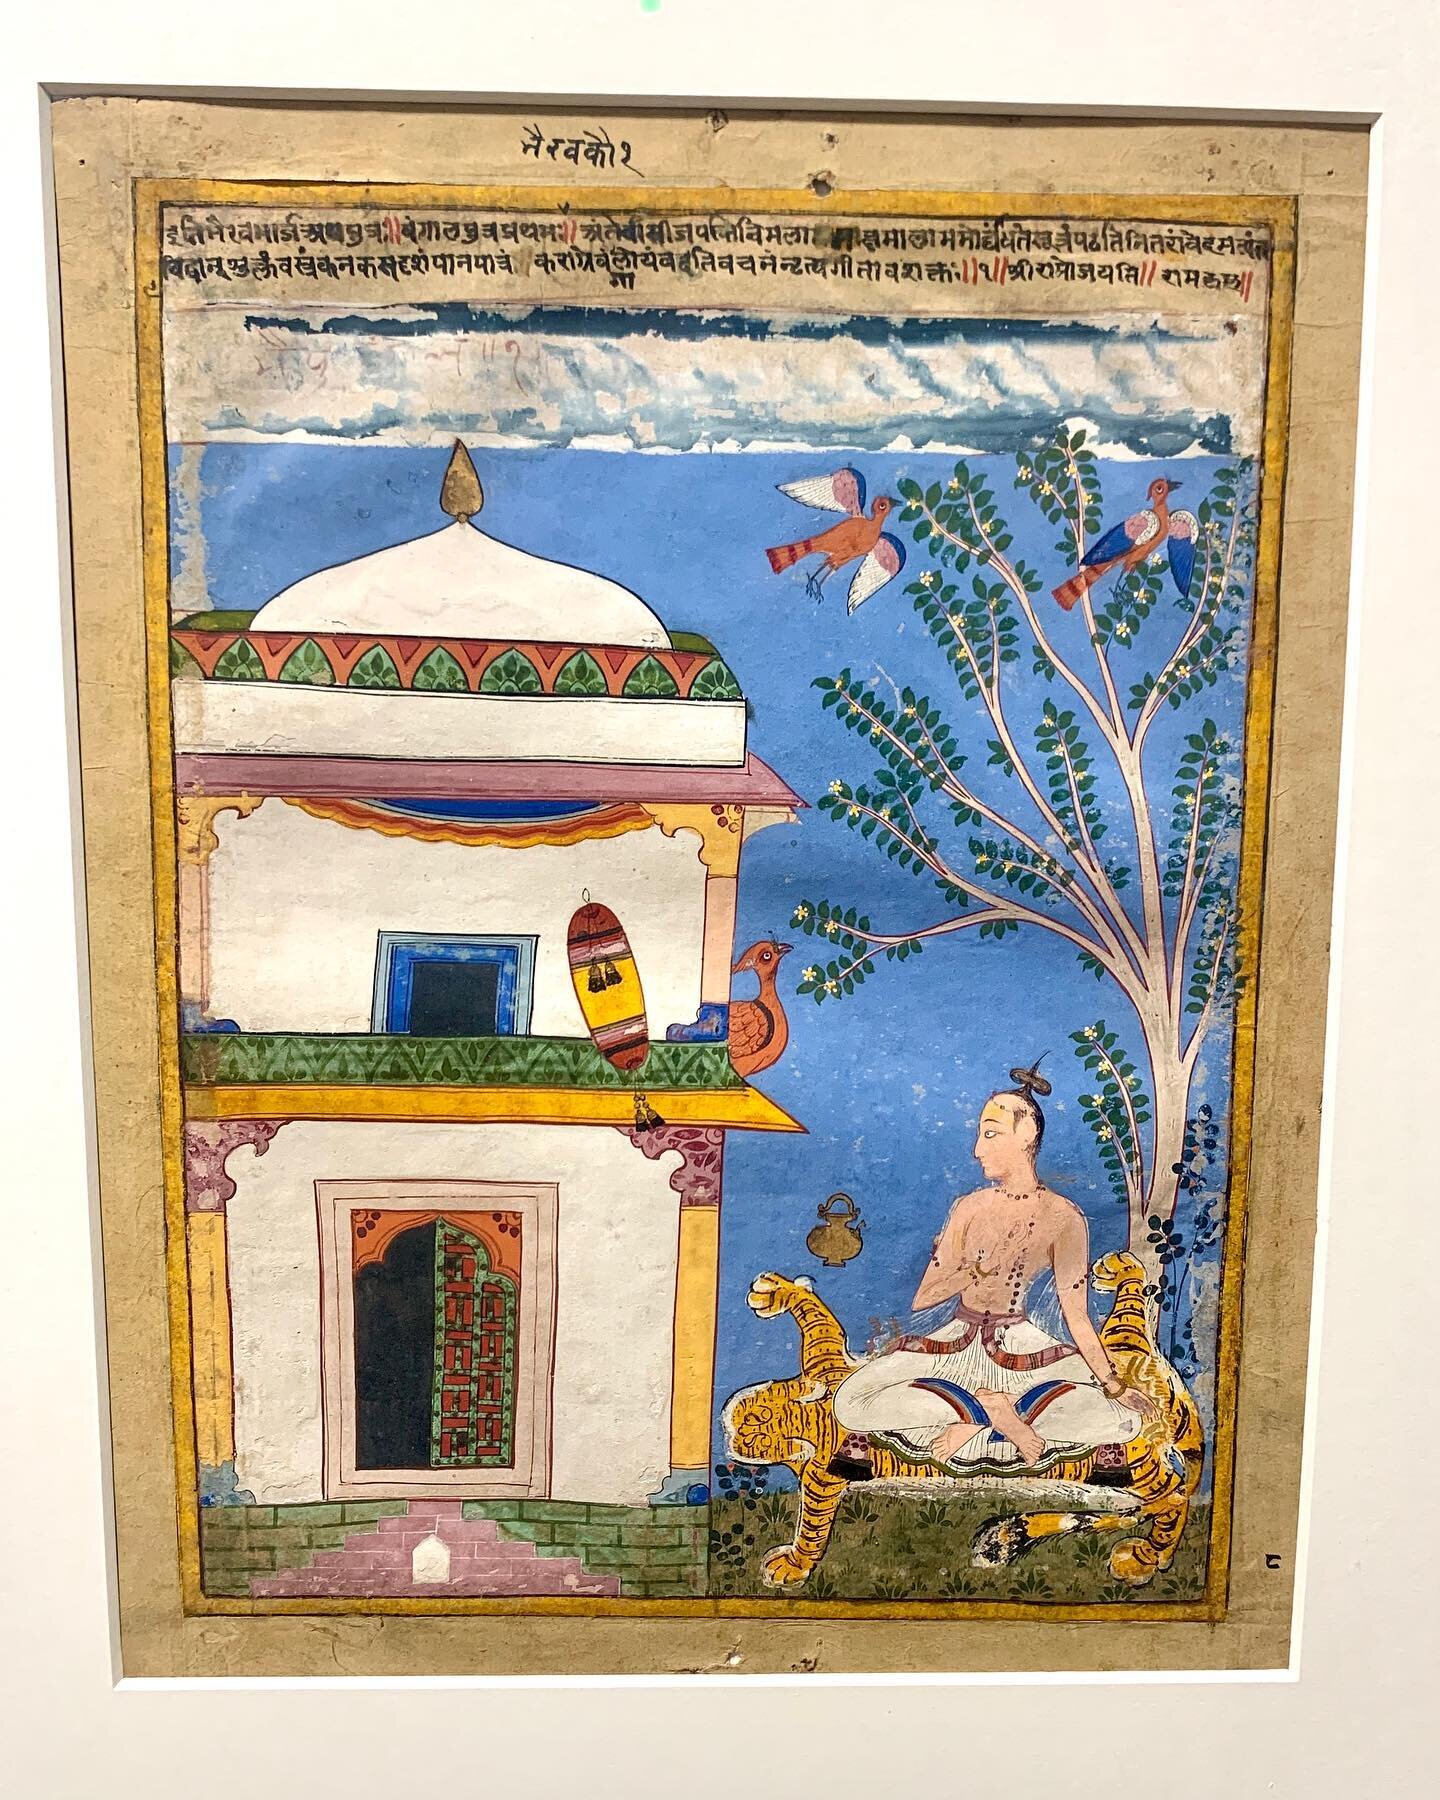 Beautiful collection of Indian art at Luhring Augustine in Tribeca -- in love with the series of Ragamala (visualized paintings of the ragas) &mdash; they even included some of the ragas alongside for listening! 💙❤️💛
.
&ldquo;what does sound look l